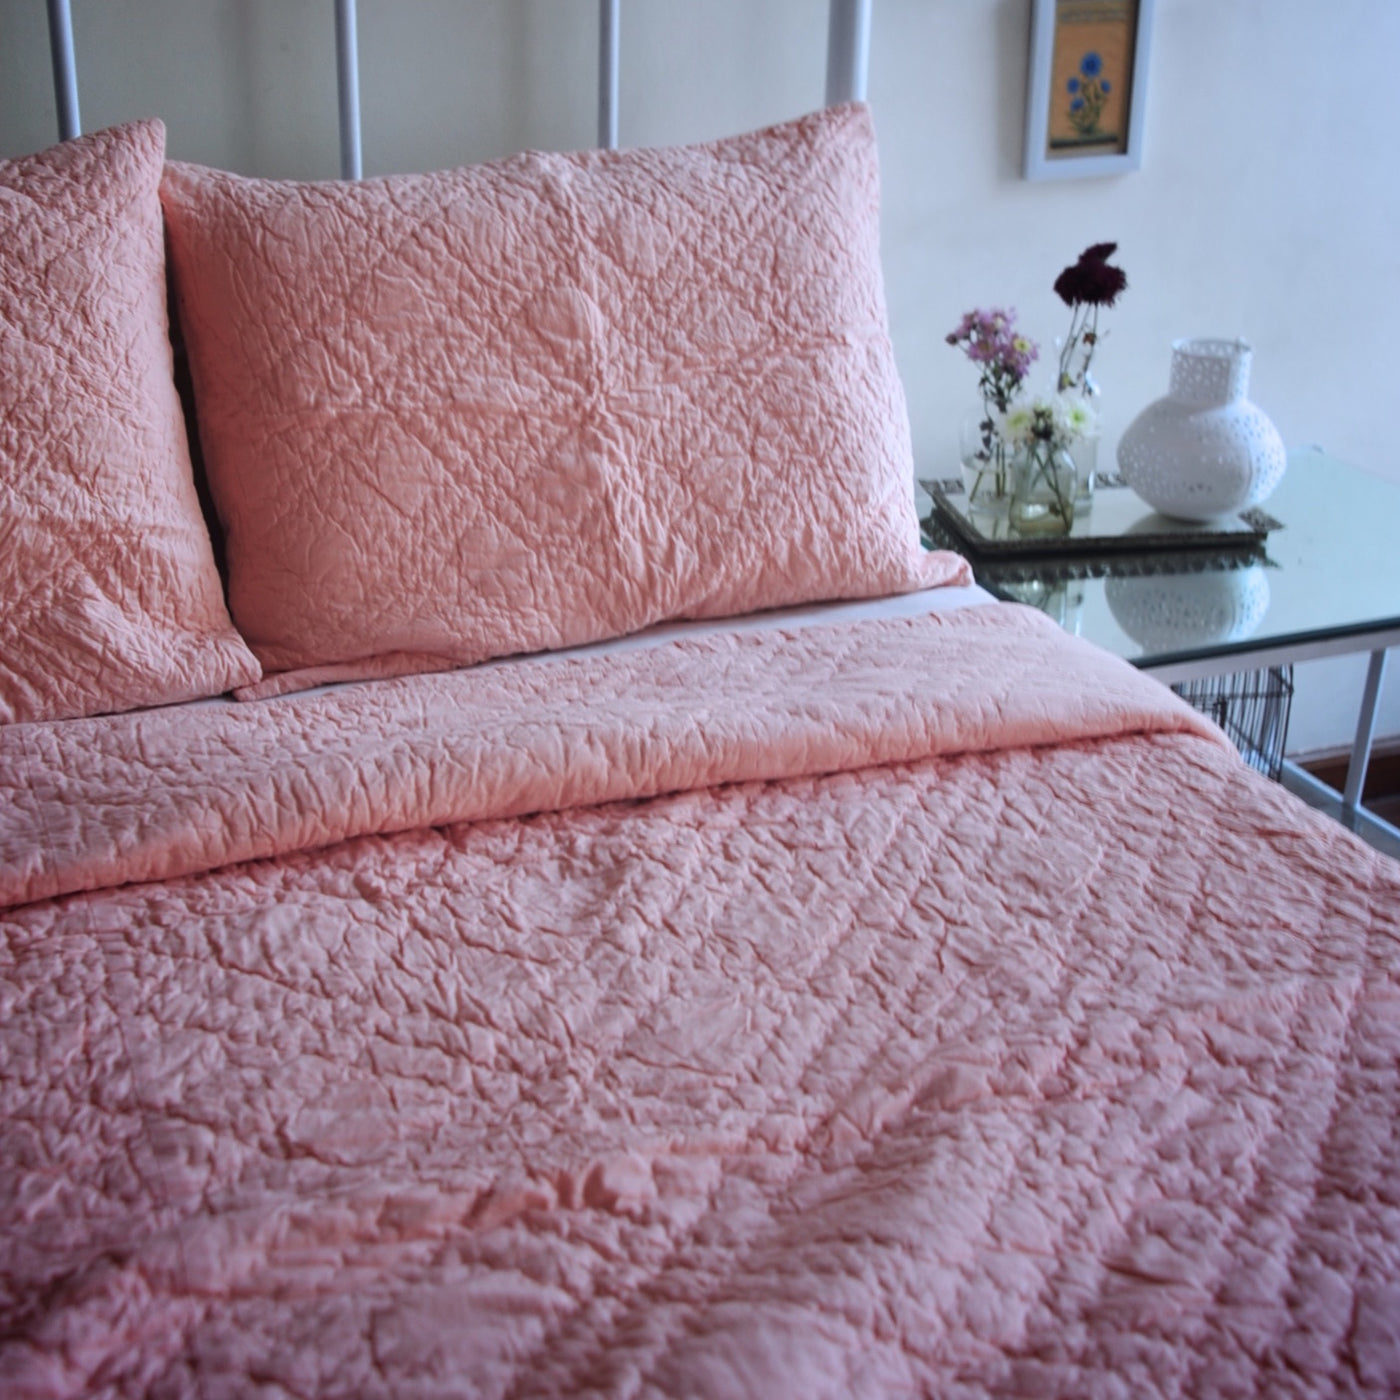 Nottingham, Hand Quilted Diamond Pattern Dirty Pink Quilt 98x92 Inches, Queen Size - kinchecom